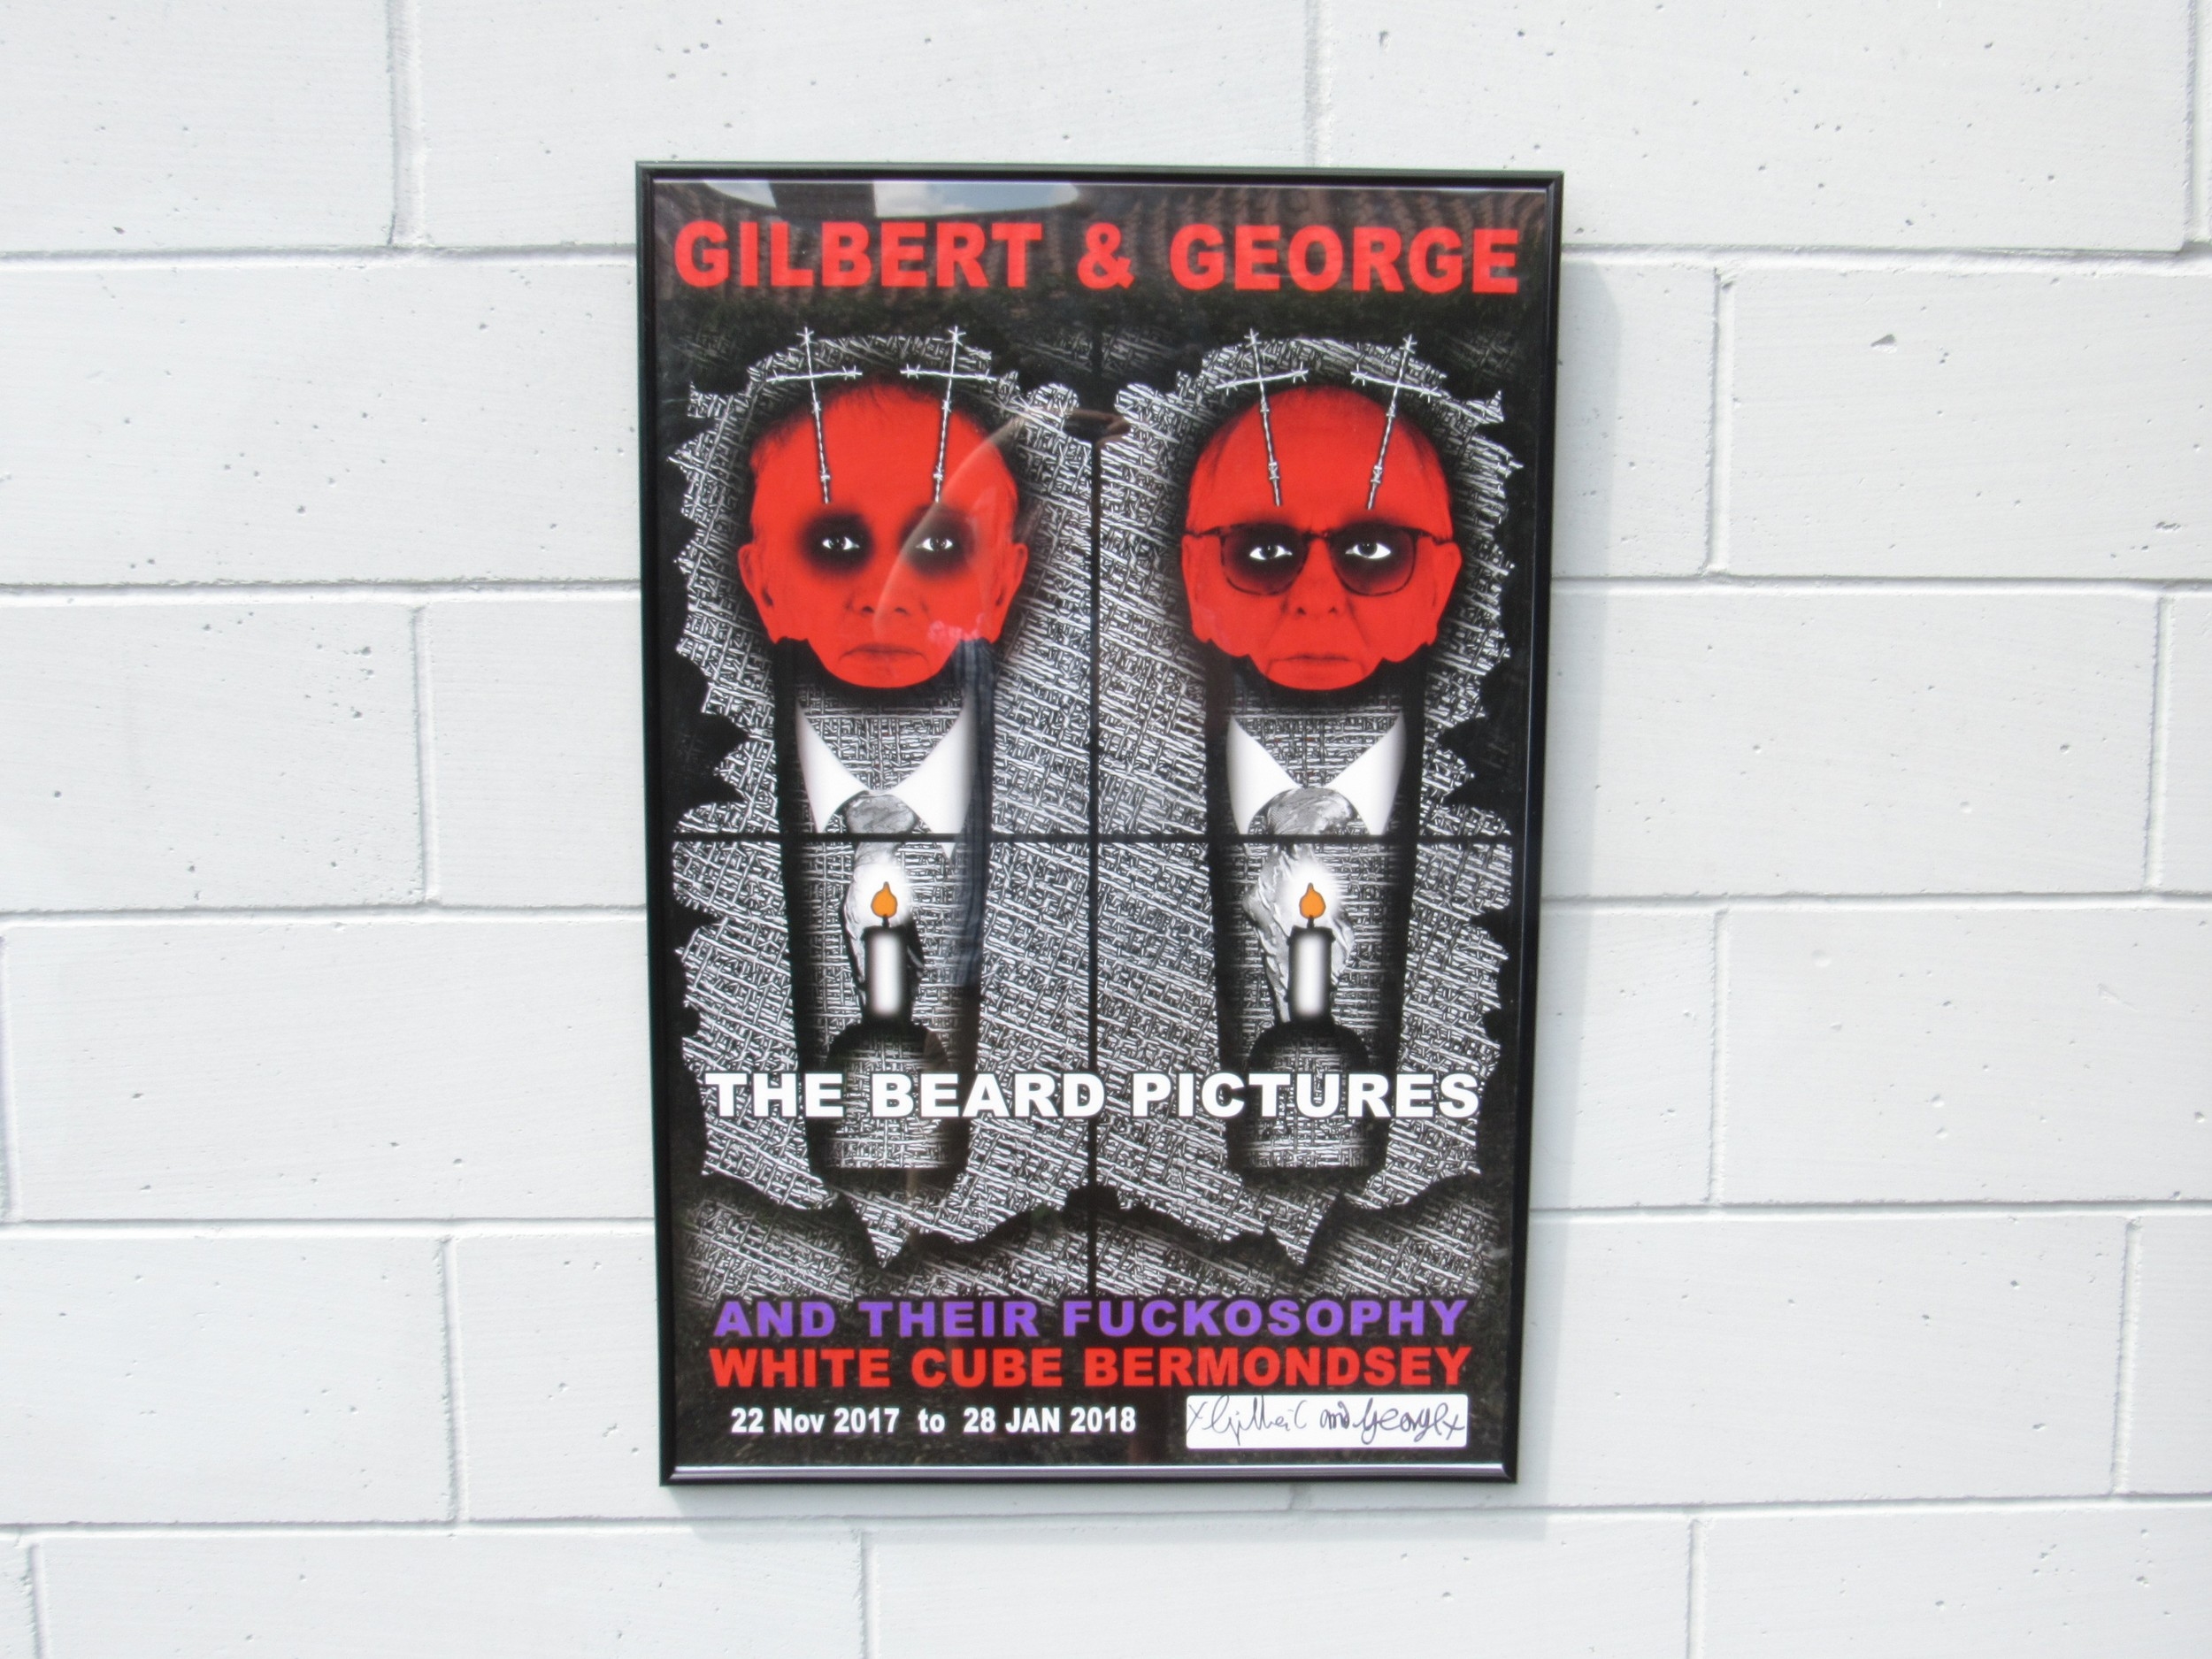 The Beard pictures by Gilbert & George, 2017